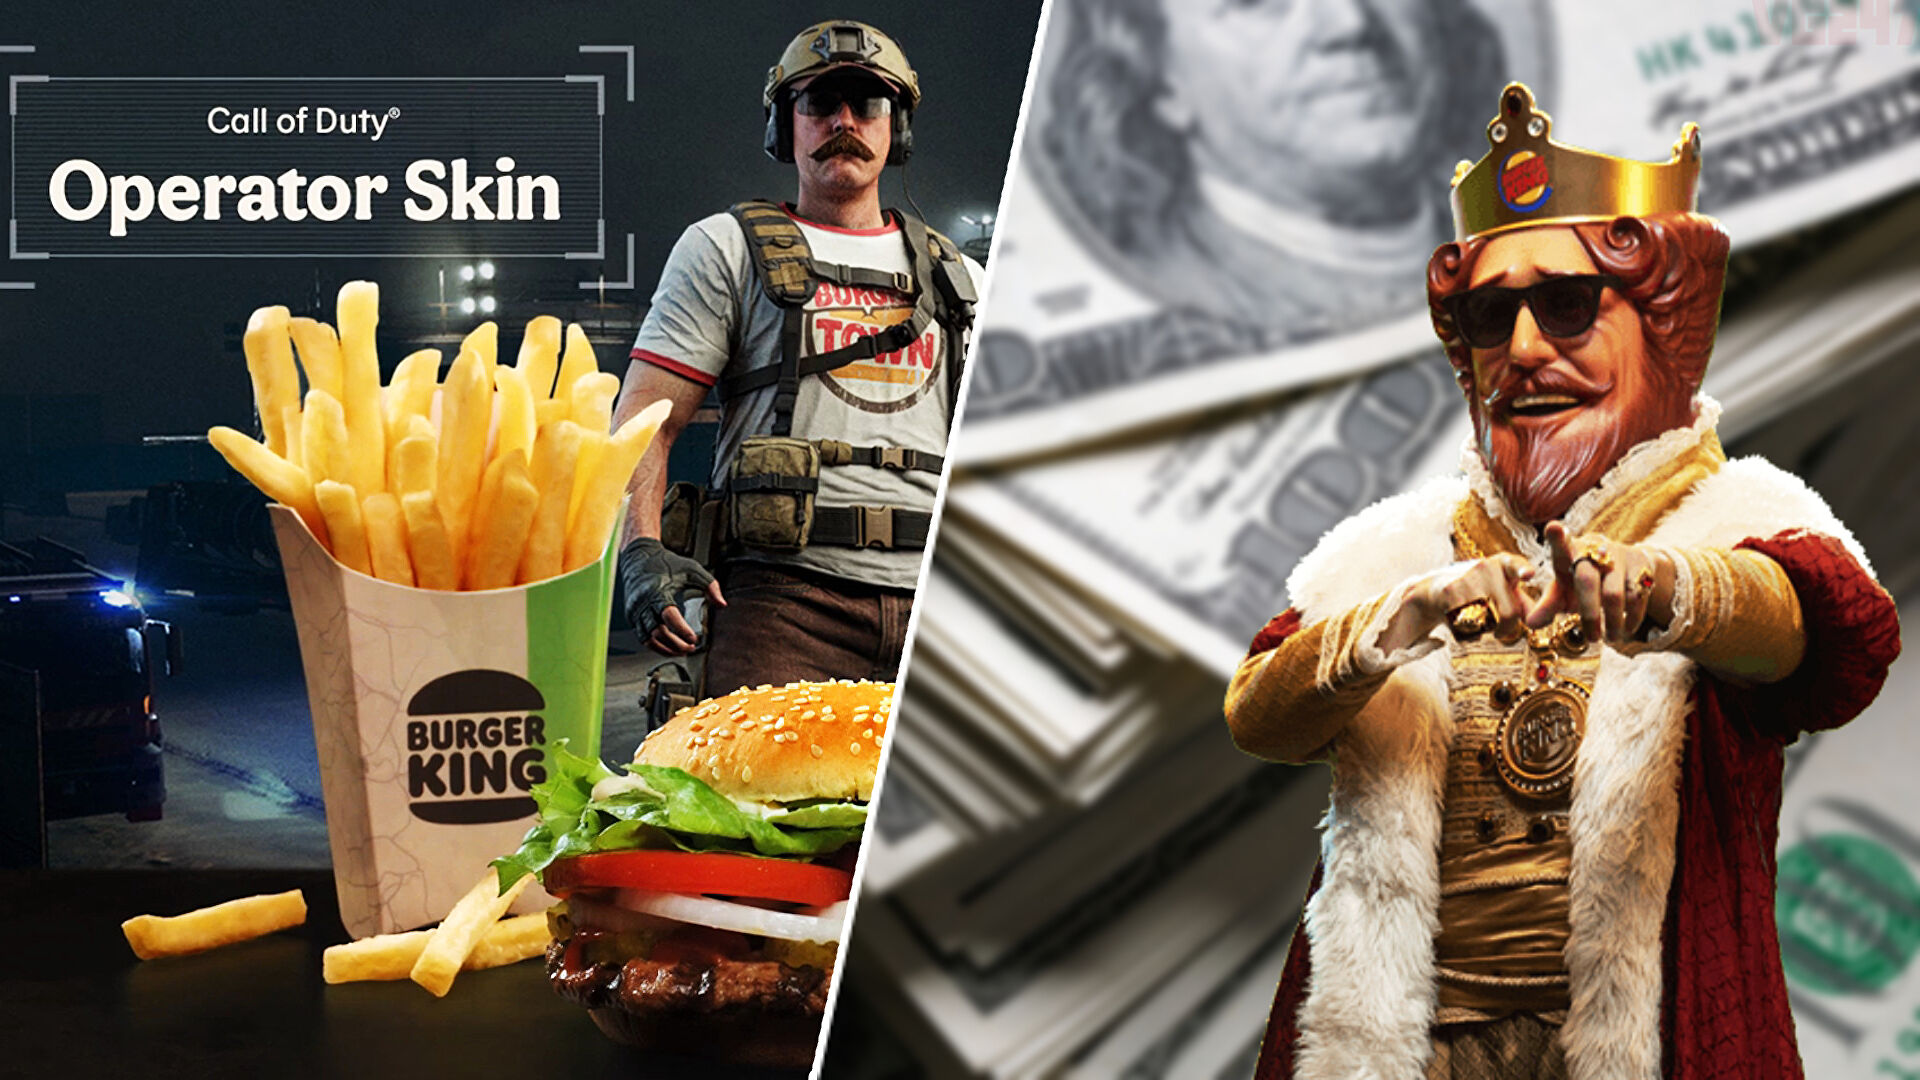 $4000 later, he’s starting a family: For some, MW2’s Burger King skin grey market is paying out big